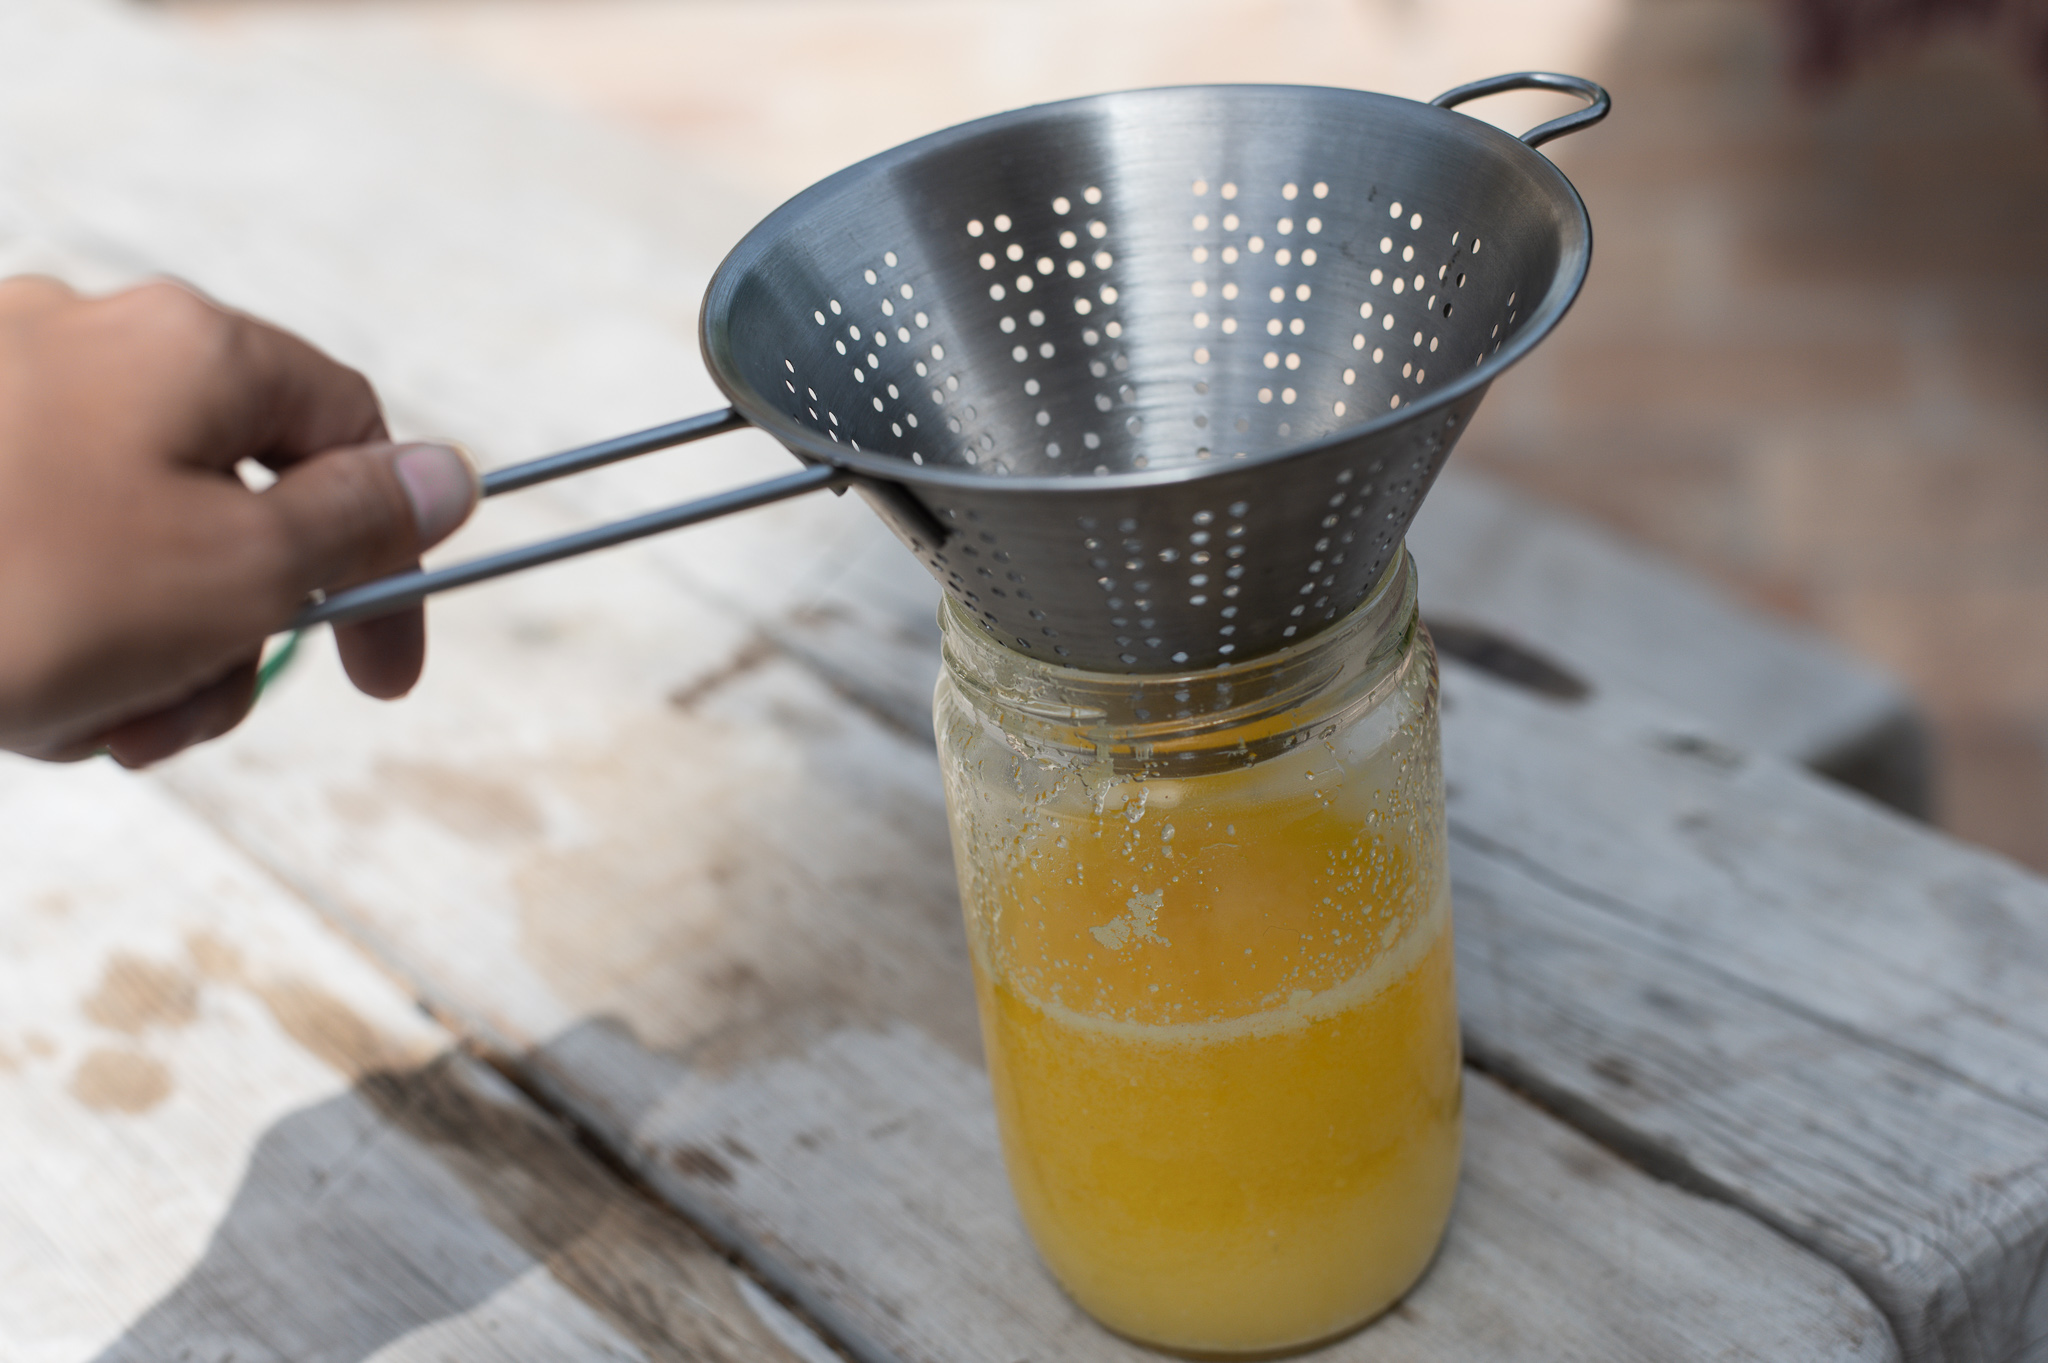 strain your ghee keeping the impurities out